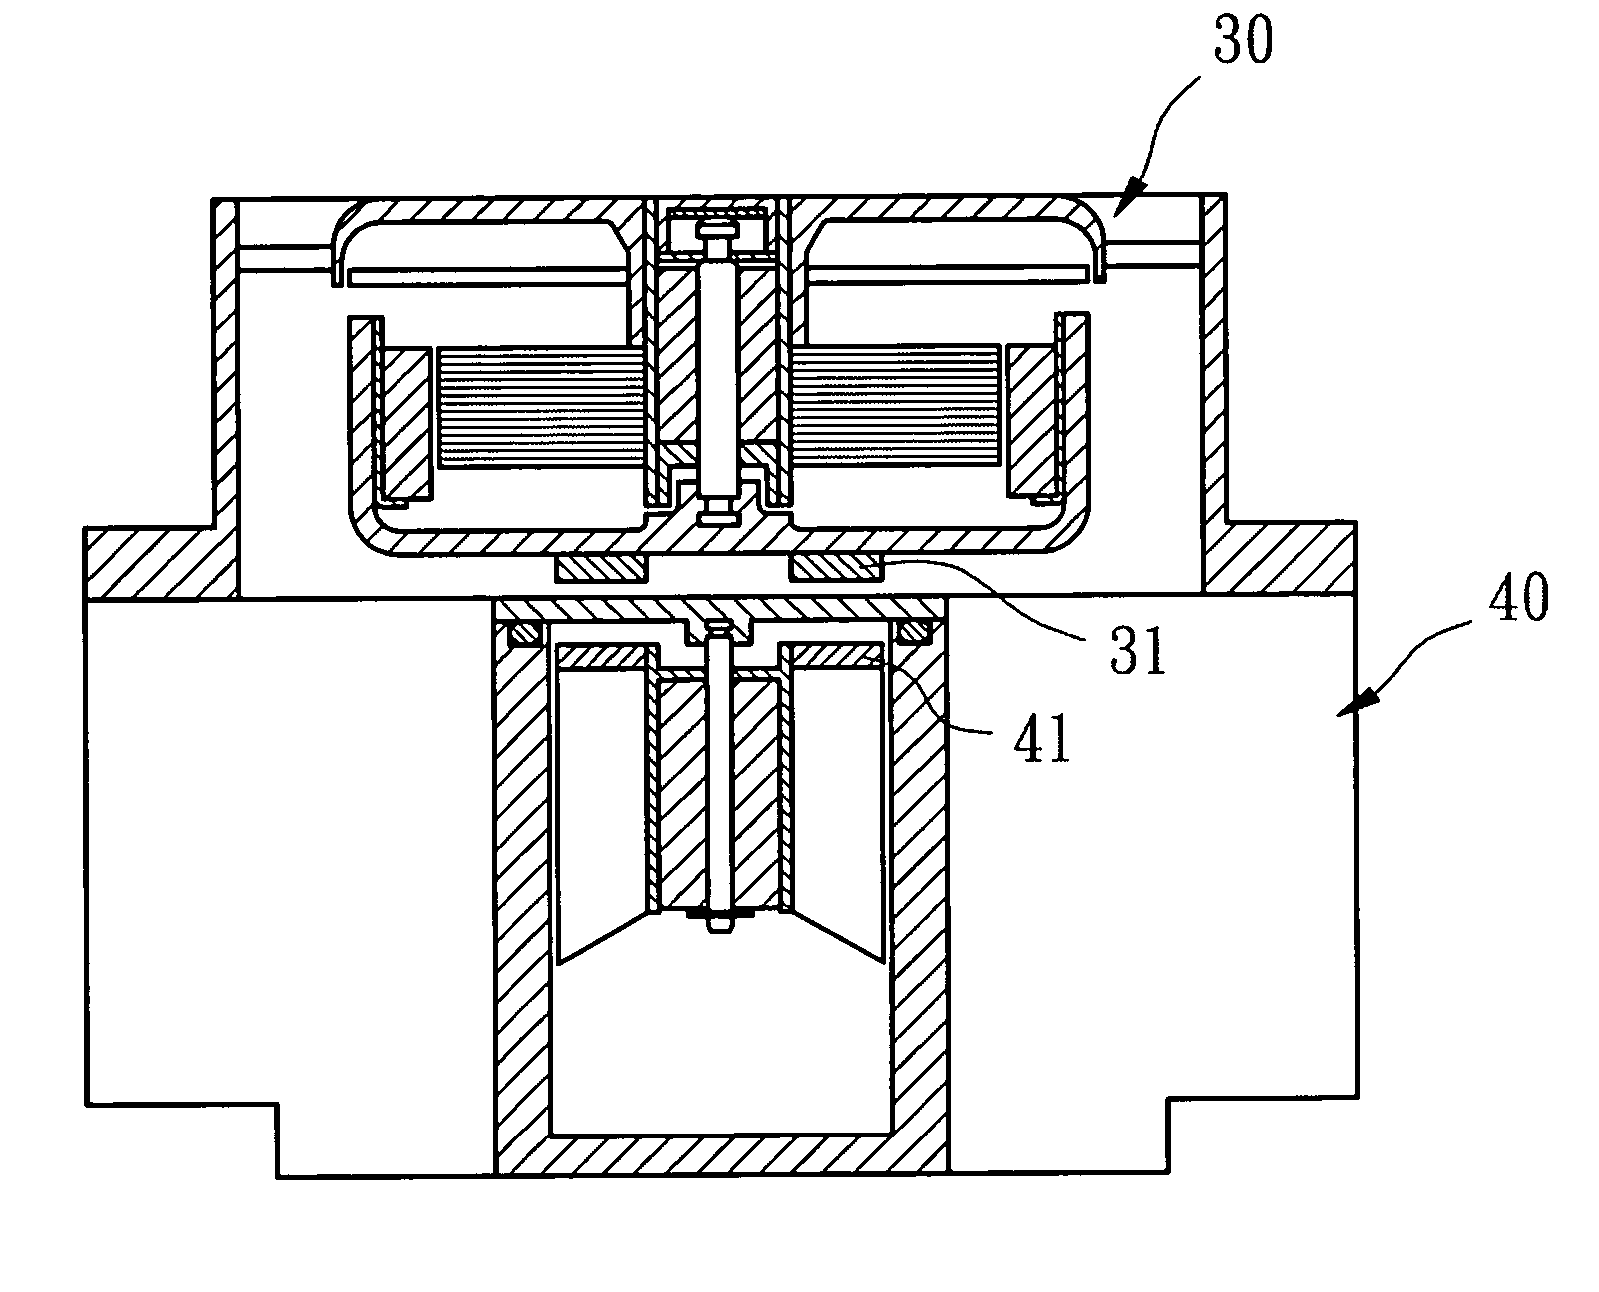 Indirect power-linking device